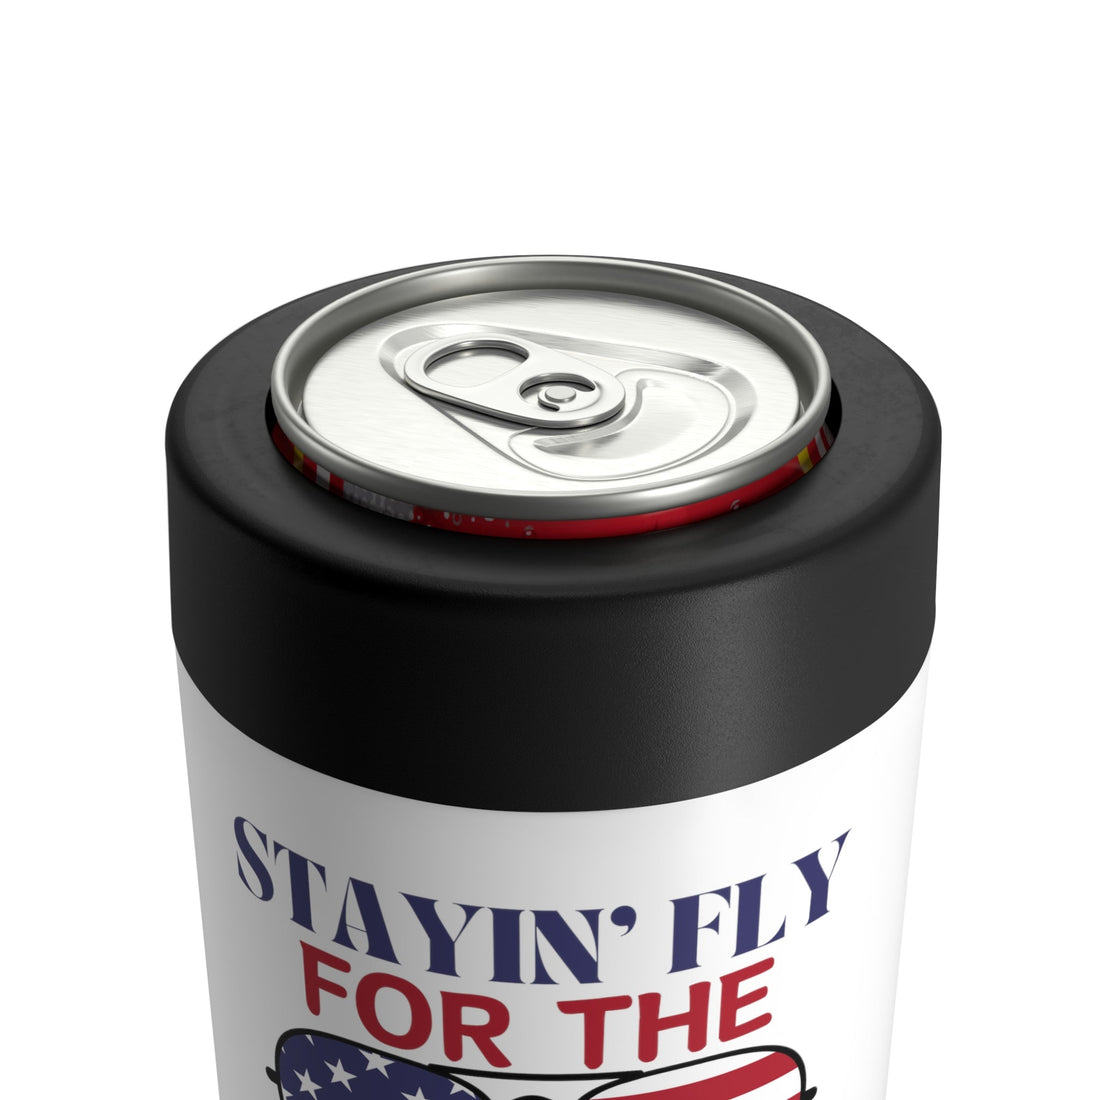 Stayin' Fly This 4th Can Holder - Mug - Positively Sassy - Stayin' Fly This 4th Can Holder